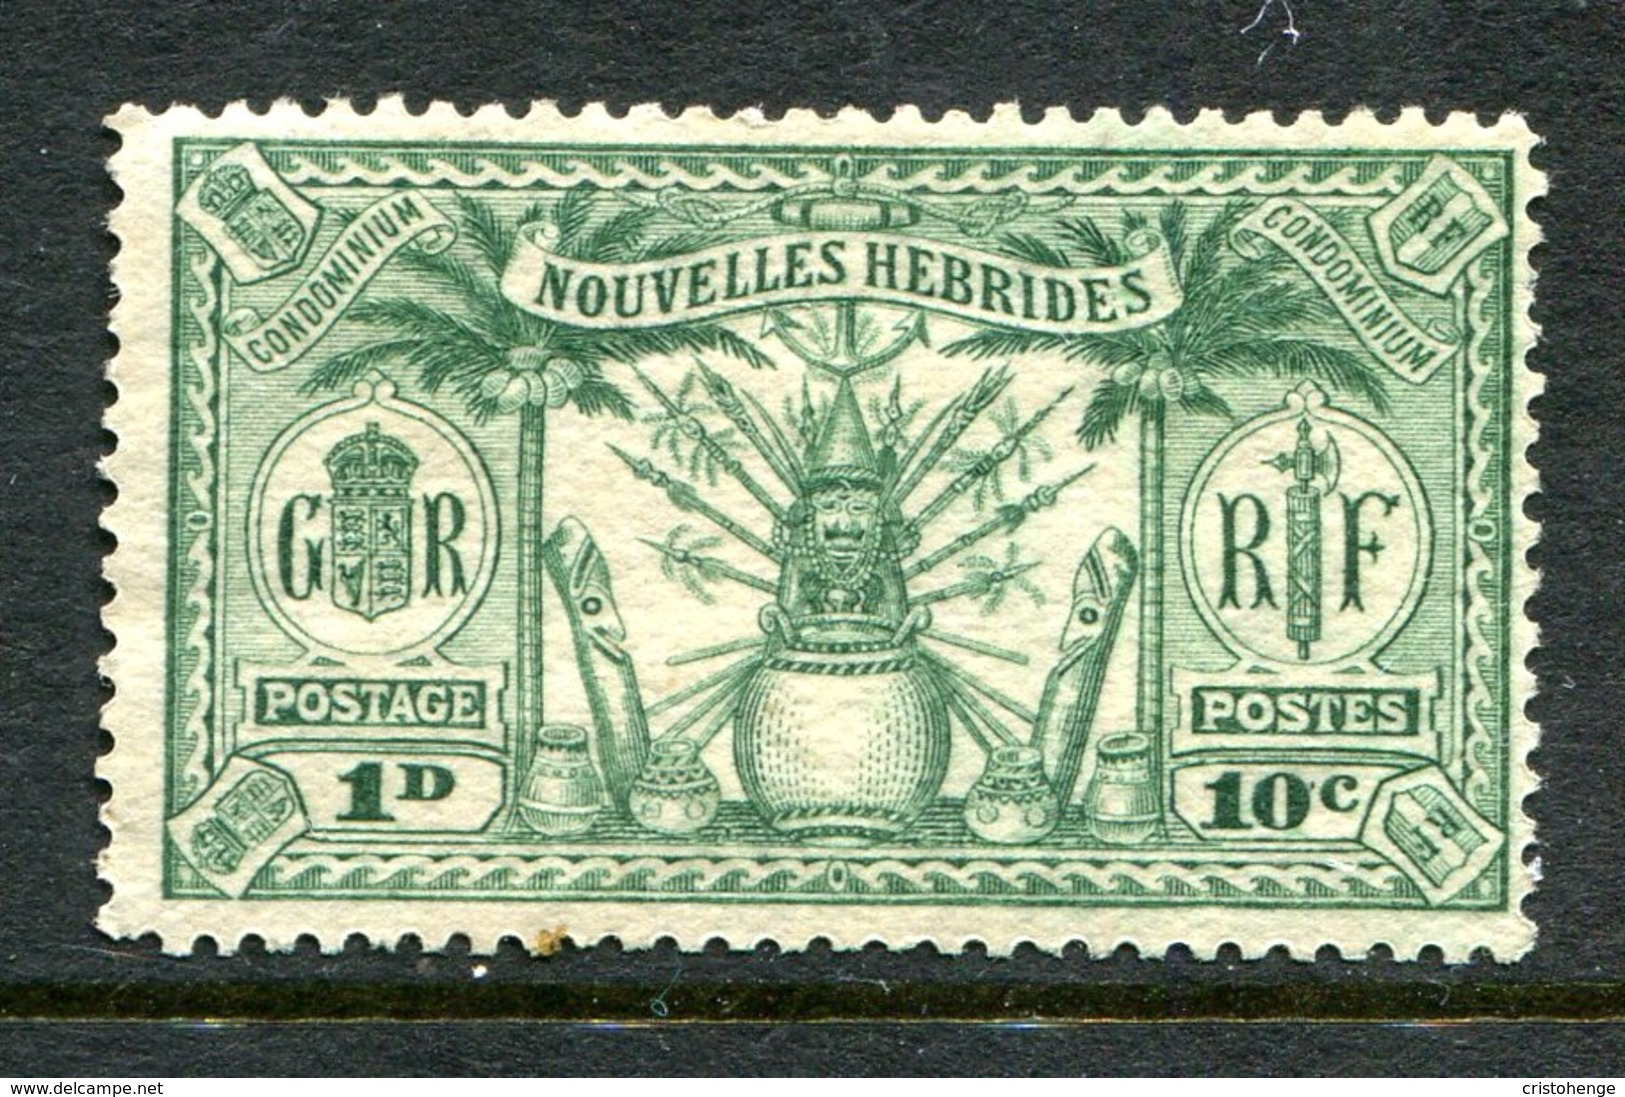 Nouvelles Hebrides 1925 Weapons & Idols - Dual Currency - 10c (1d) Green LHM (SG F43) - Unused Stamps